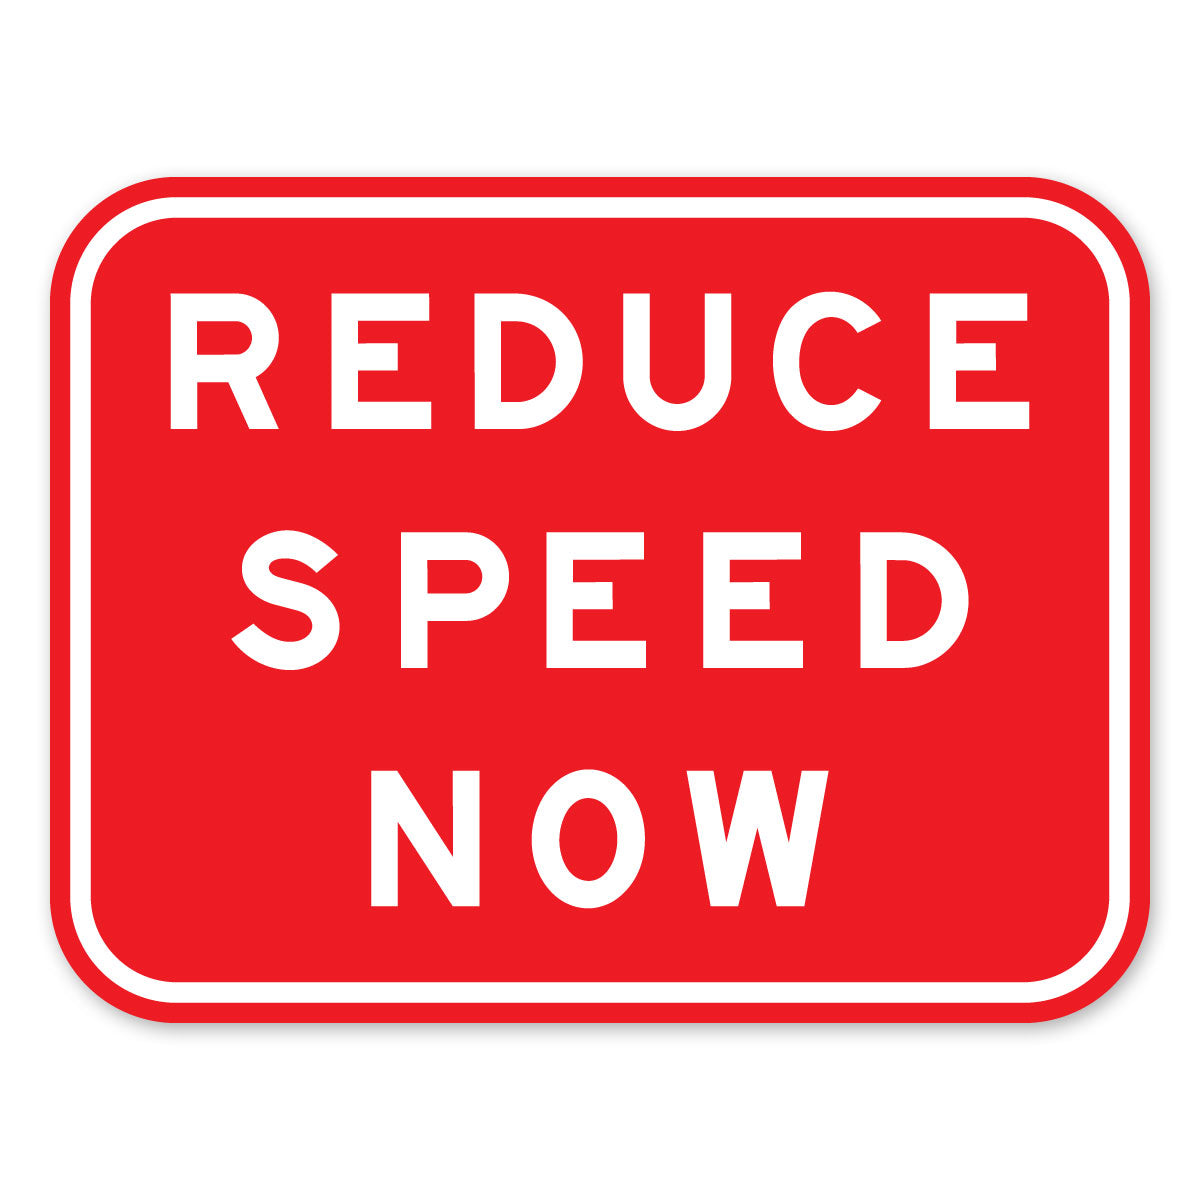 Warning: Reduce Speed Now Sign